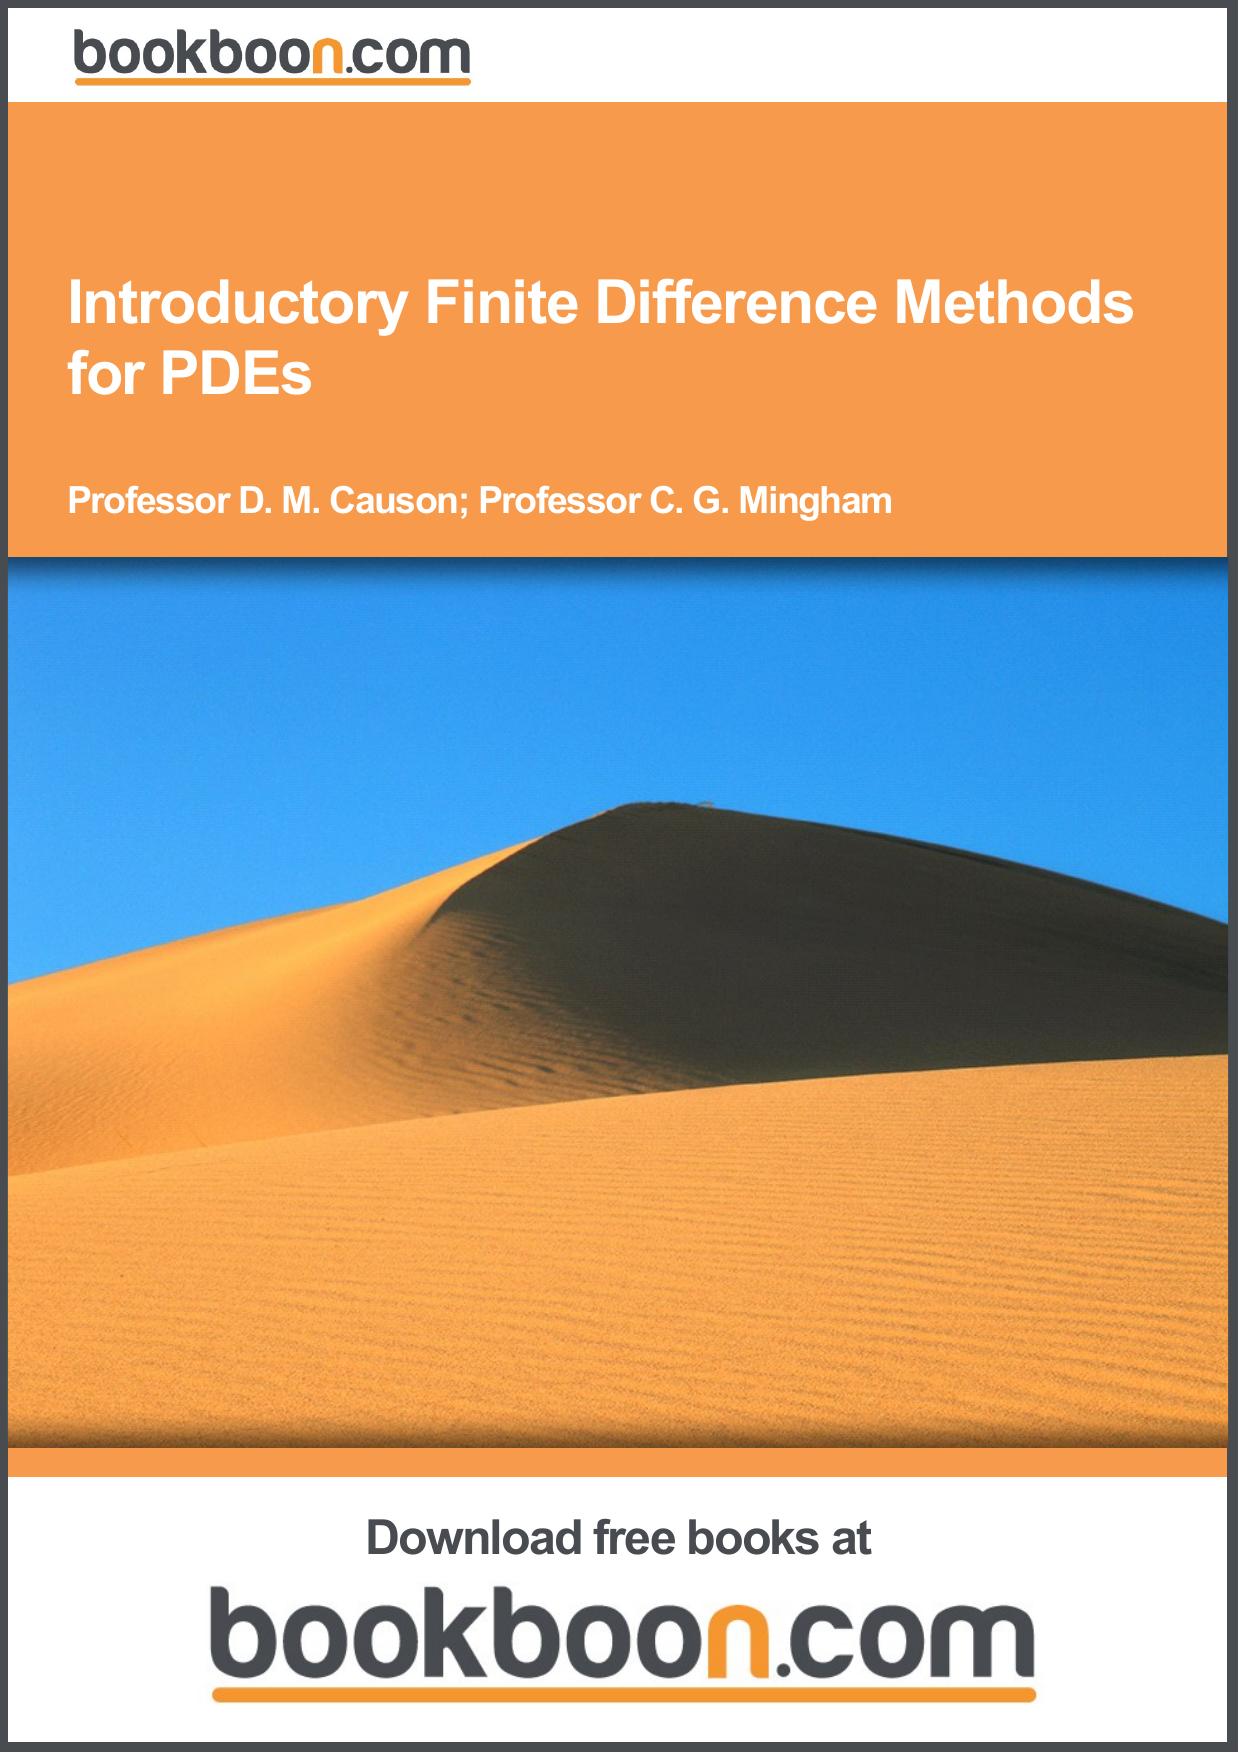 Introductory Finite Difference Methods for PDEs